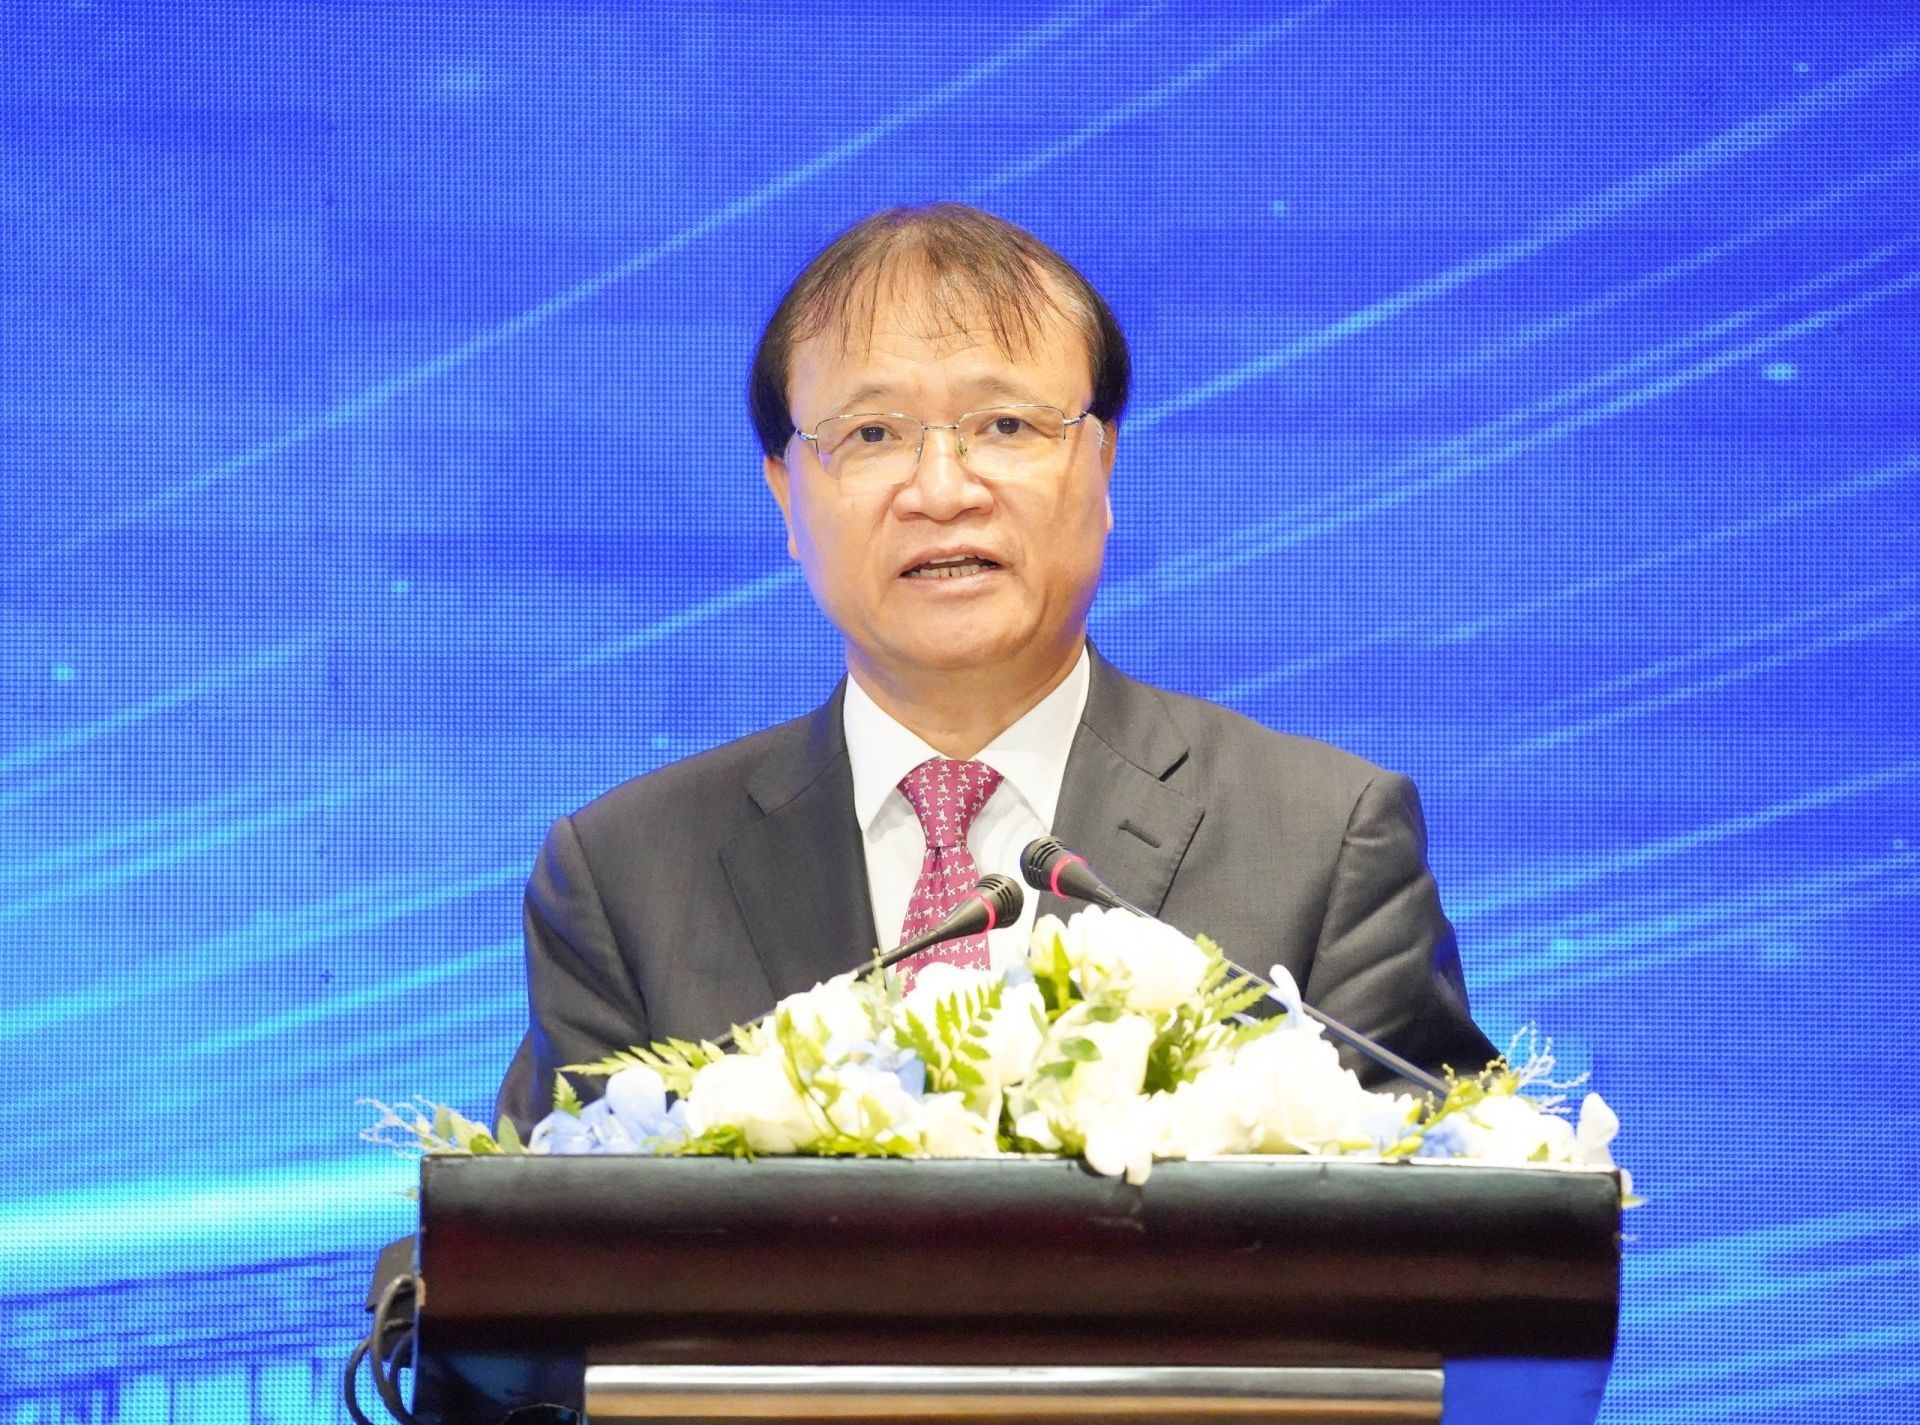 Deputy Minister of Industry and Trade Do Thang Hai spoke at the Forum.